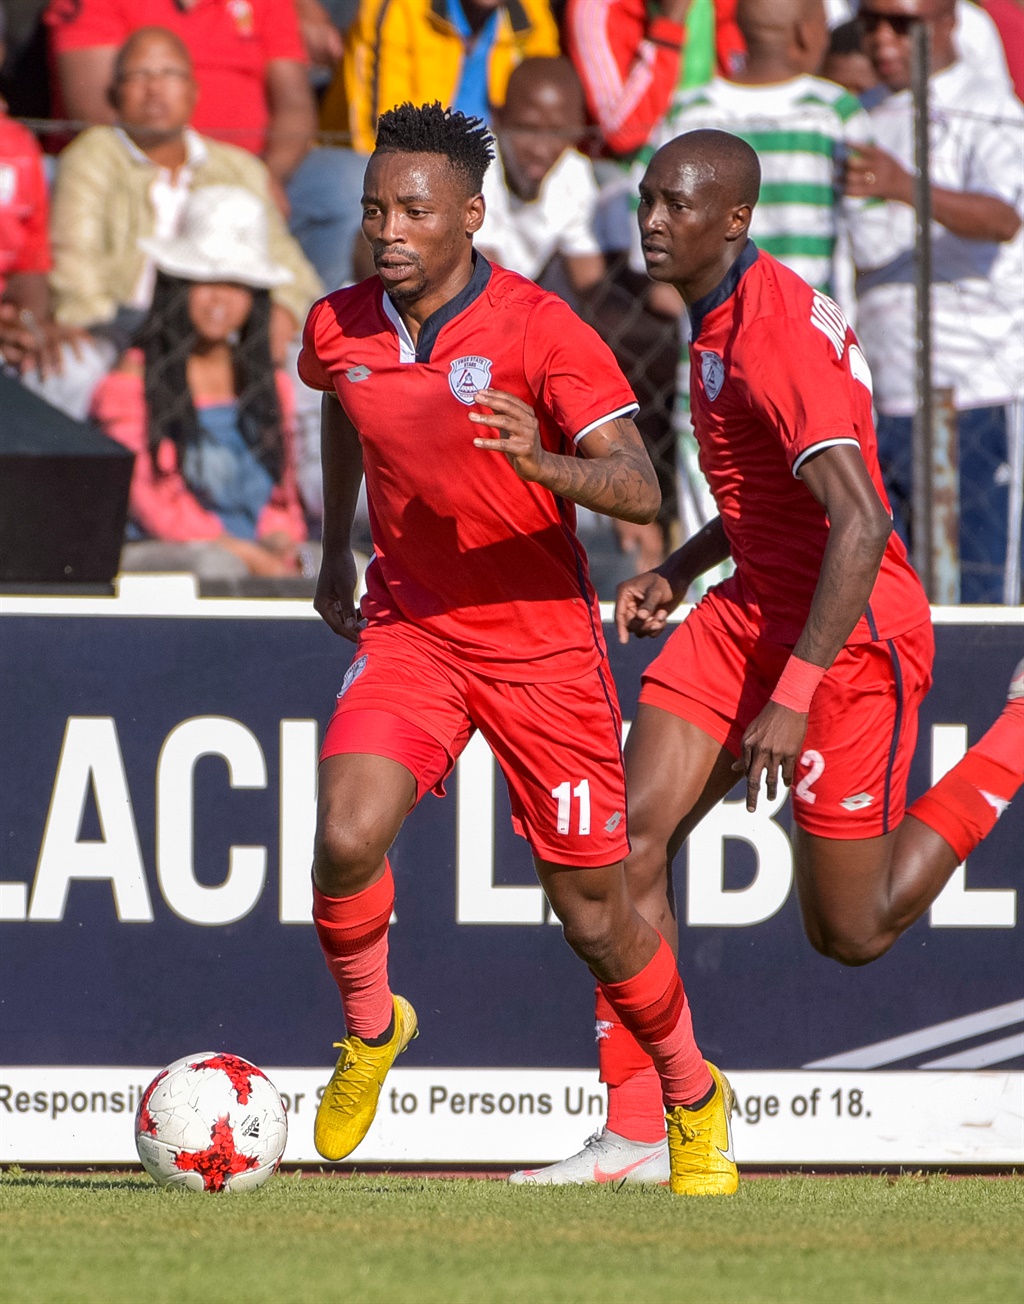 Sinethemba Jantjie of Free State Stars during the Absa Premiership 2018/19 game between Free State Stars and Bloemfontein Celtic at Goble Park 